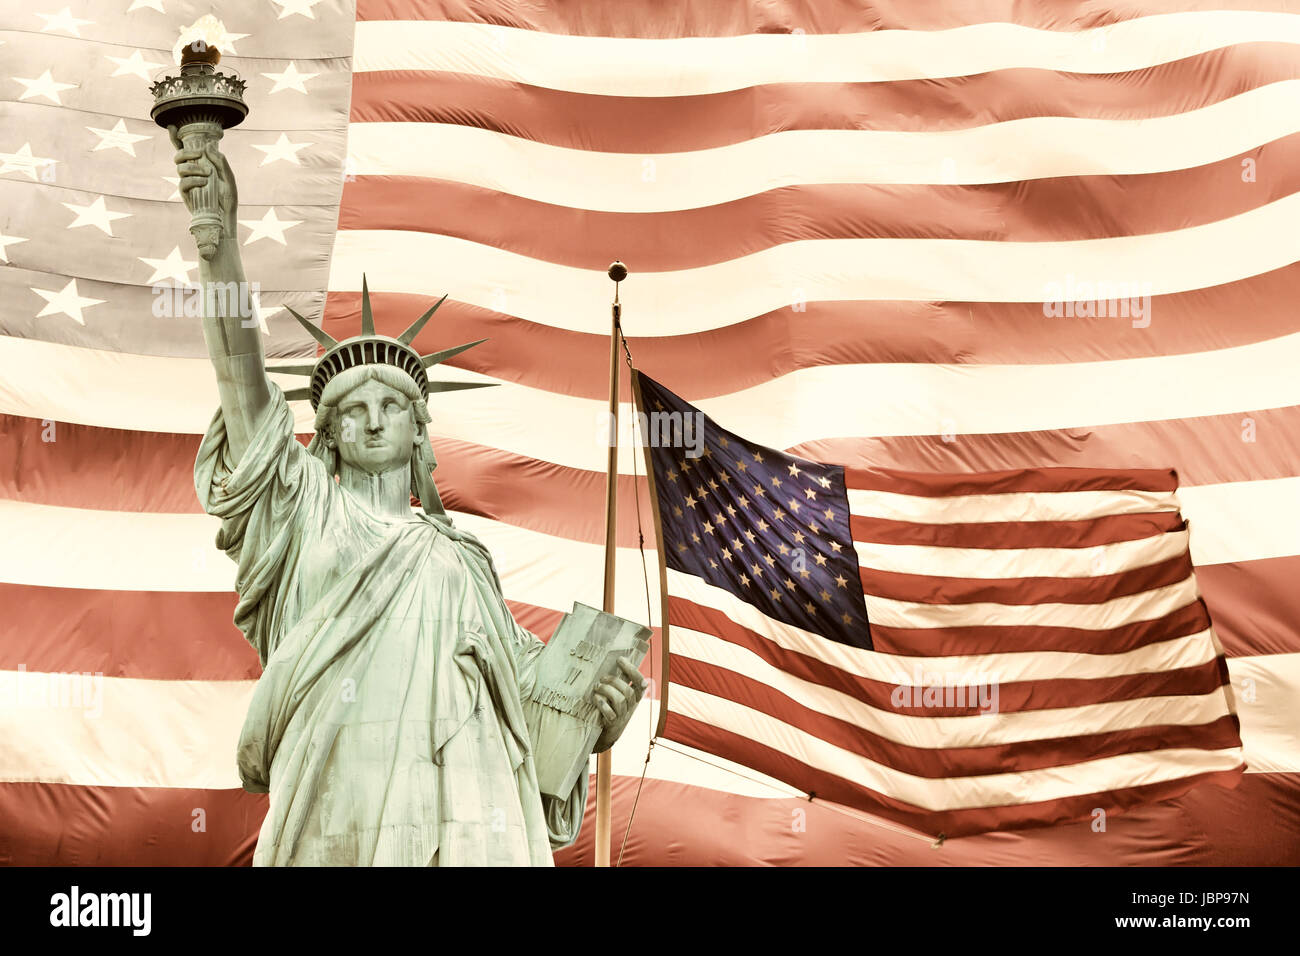 Statue of Liberty with two American flags. Large American flag in the background.Processed in subdued tones of color. Stock Photo